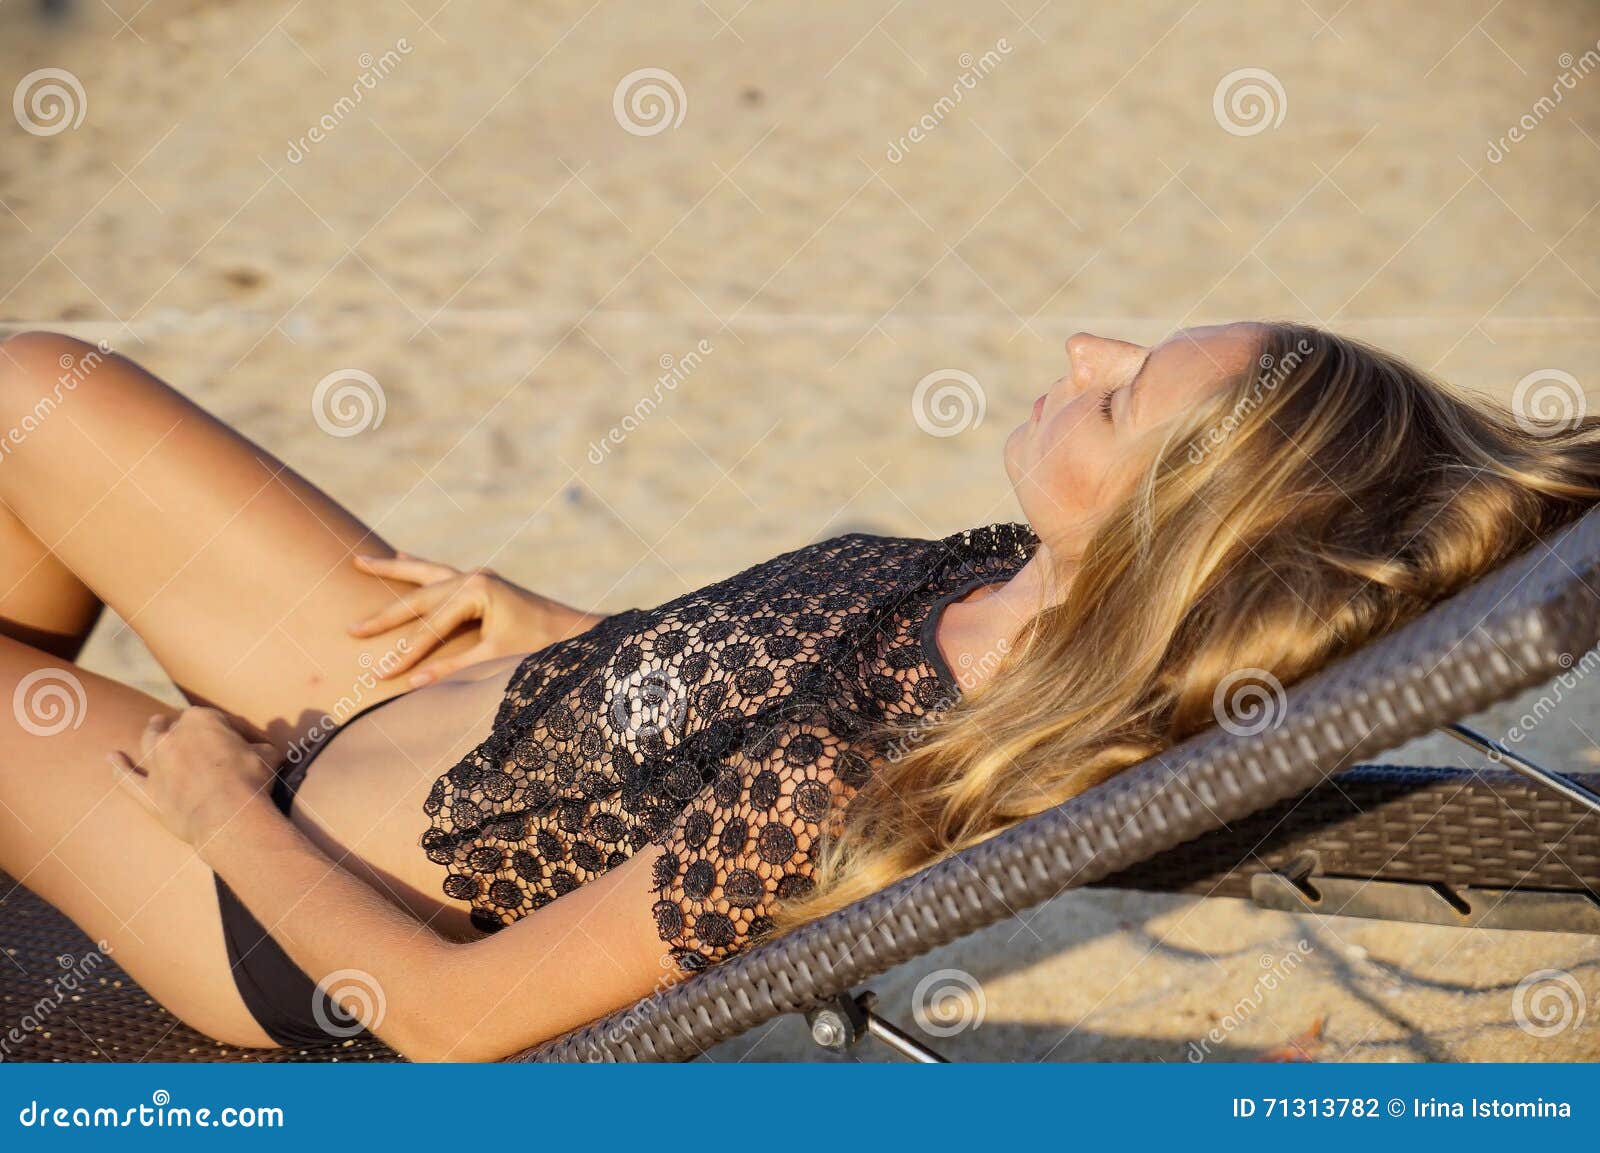 the young woman placing and softened near, unites on summer holiday good hot day, wearing a black undershirt on the tropical.